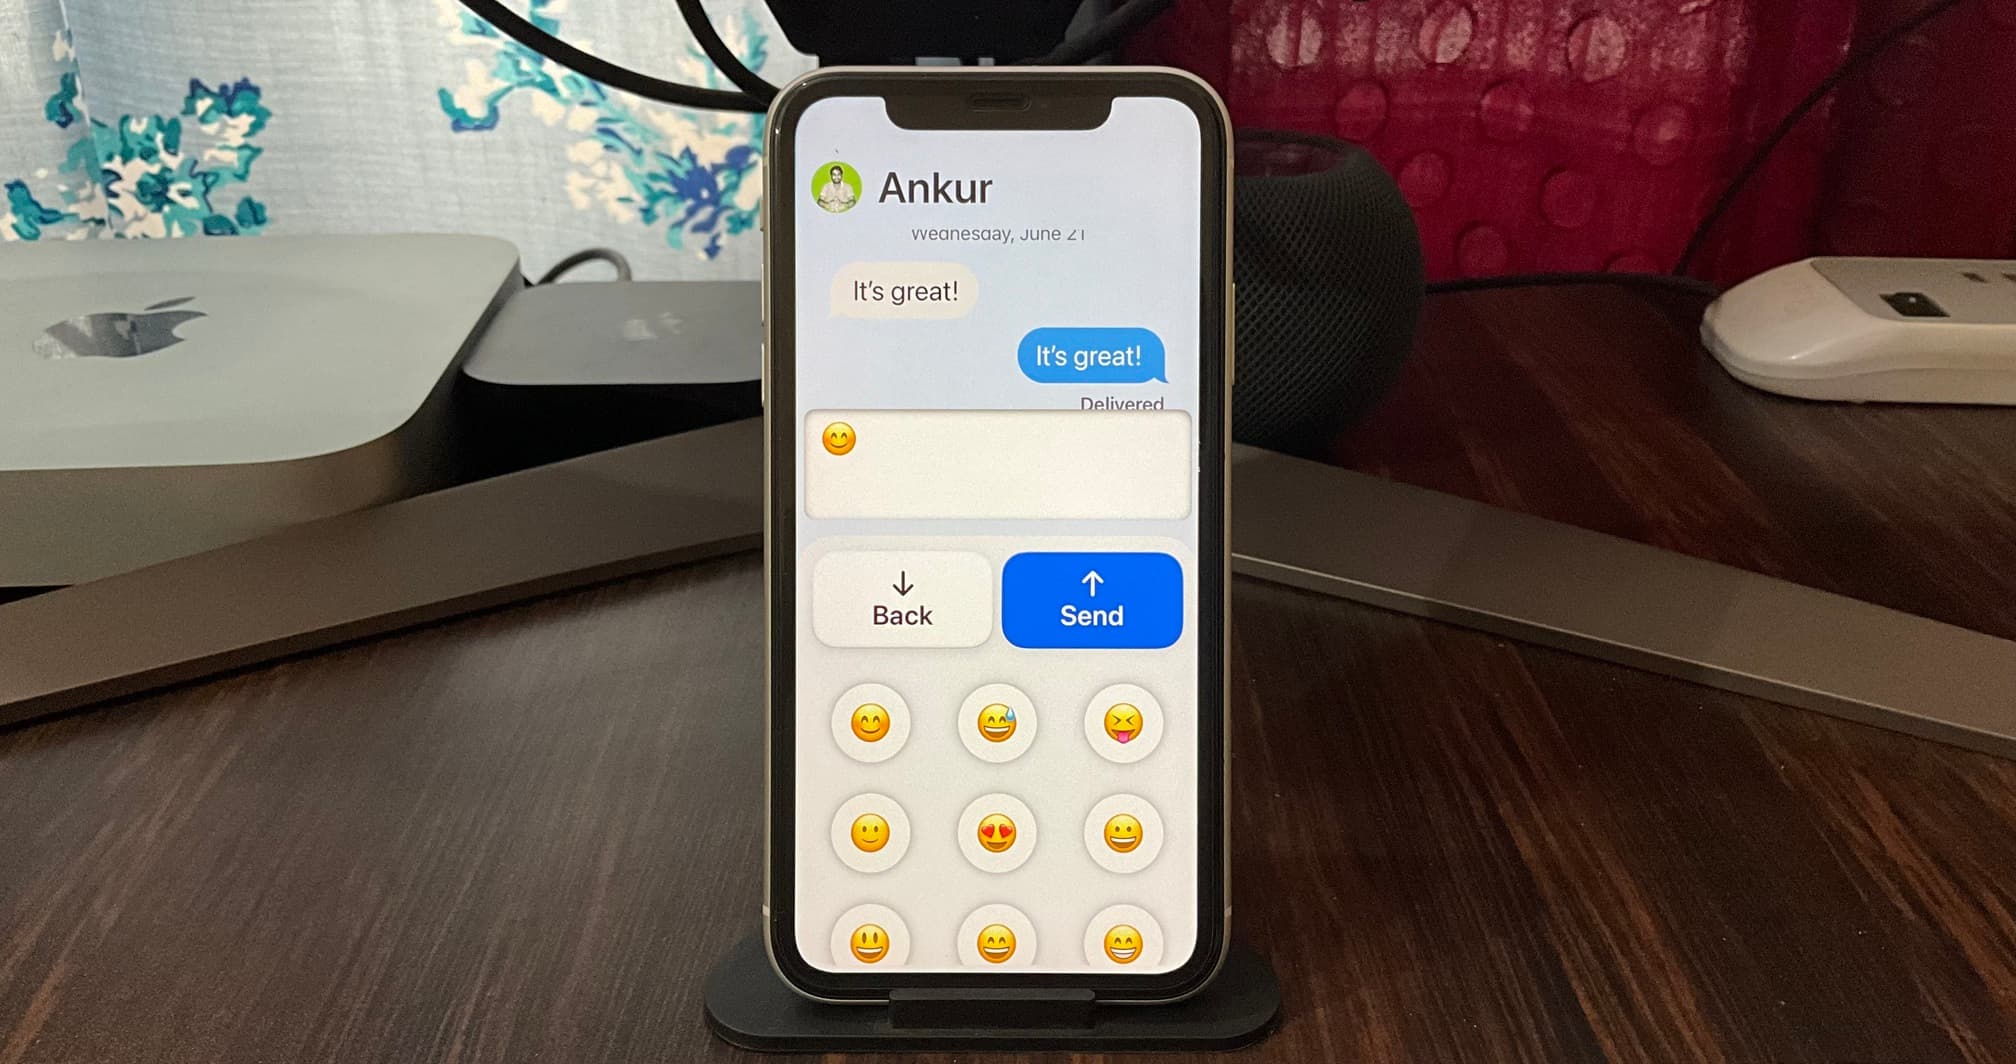 Messages app with big back and send buttons during Assistive Access on iPhone